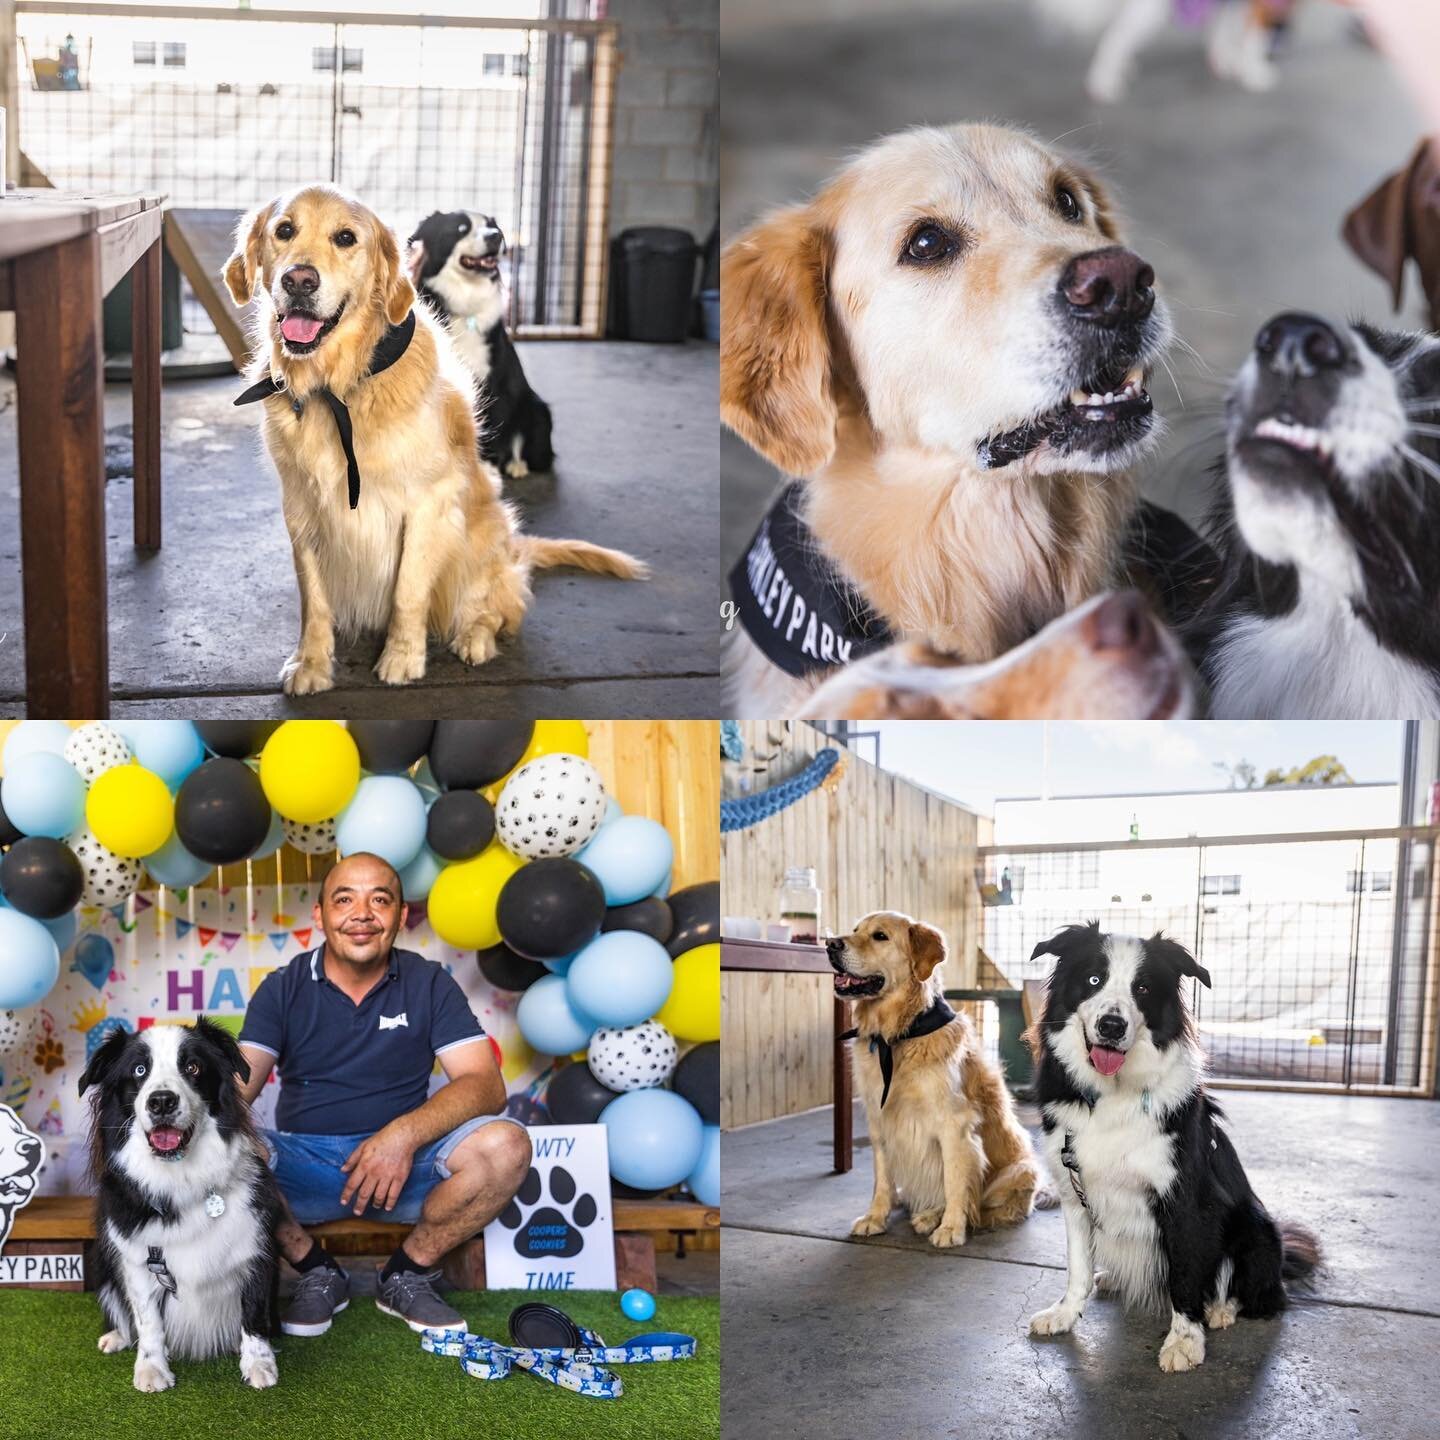 Some of the photos I took at @cooperscookiesgraceville and Oscar from @barkleypark &lsquo;s birthday party on Saturday! 🤩🥳🐕🐾❤️
 
It was a fabulous morning and I&rsquo;m just so sad I didn&rsquo;t get a photo of the cake - it was stunning! But the